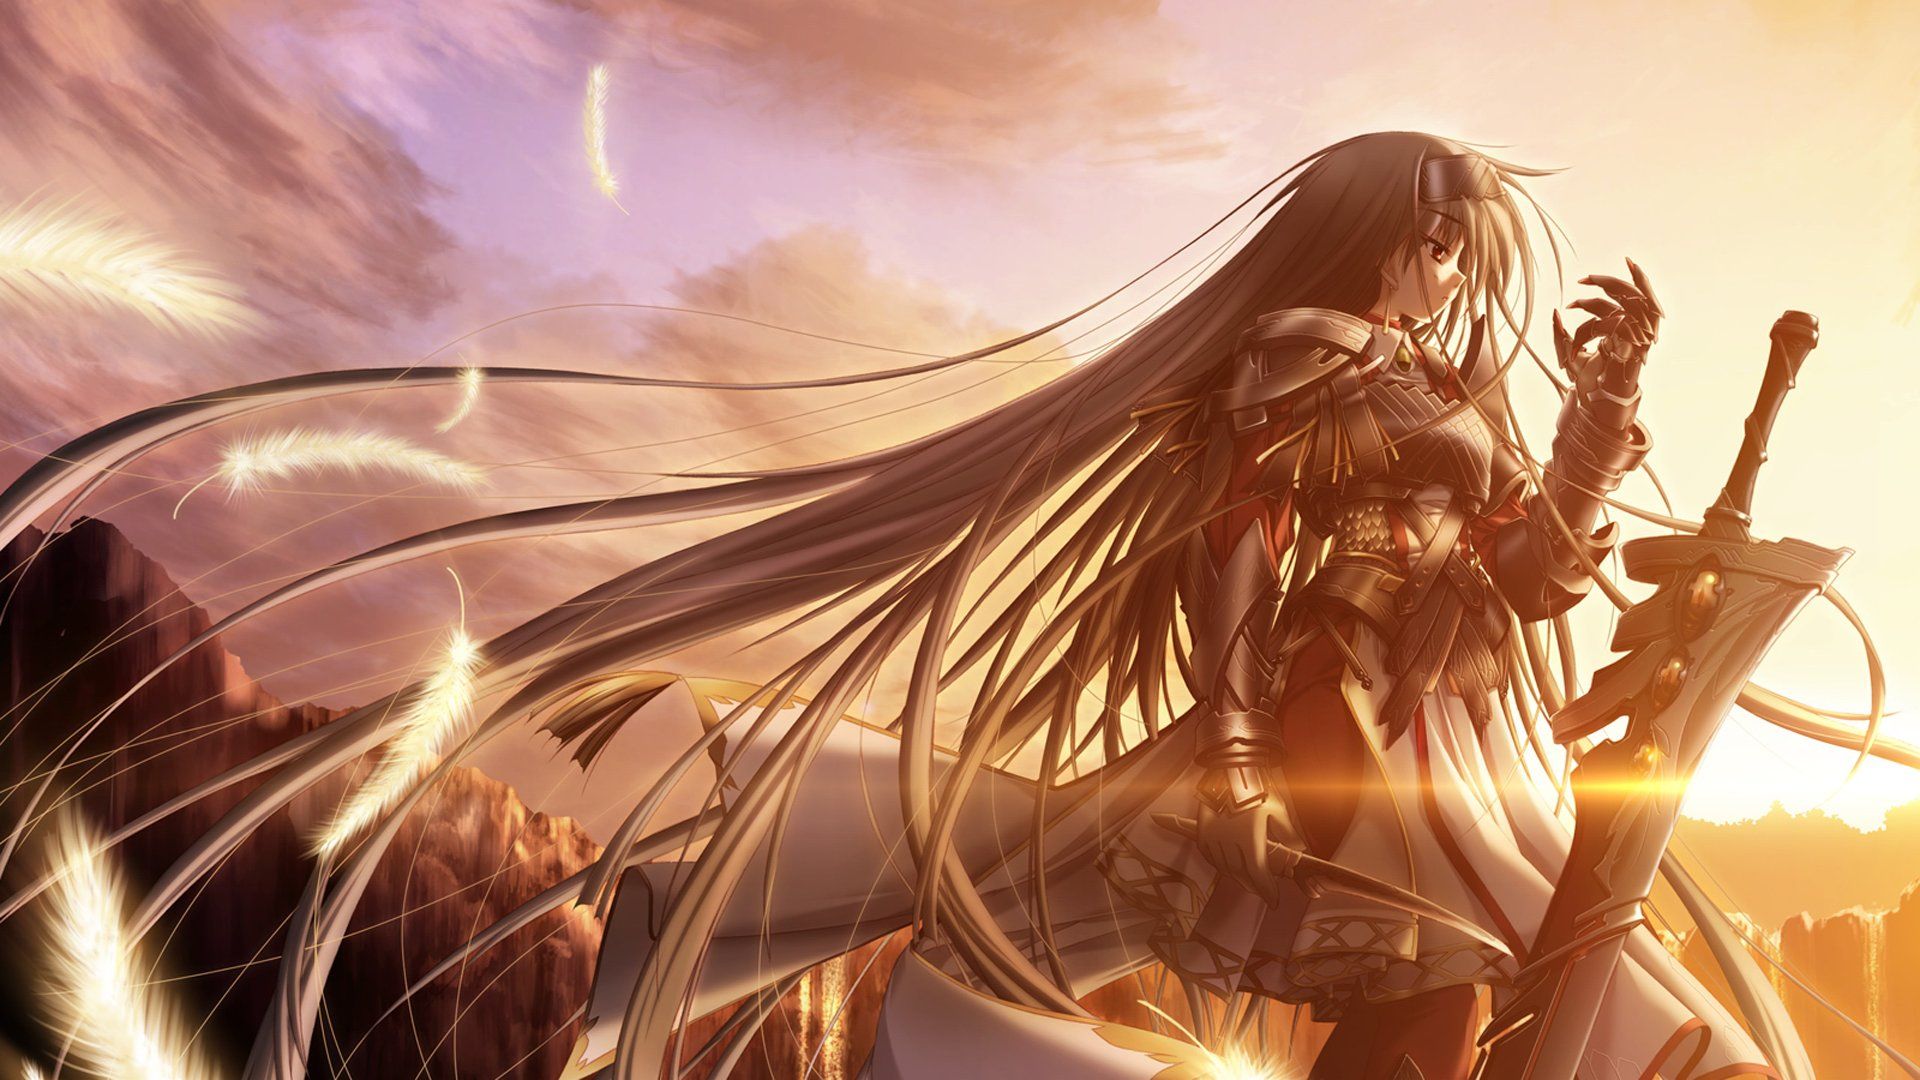 anime wallpapers hd, 061546778, 272 Wallpapers HD / Desktop and Mobile Backgrounds